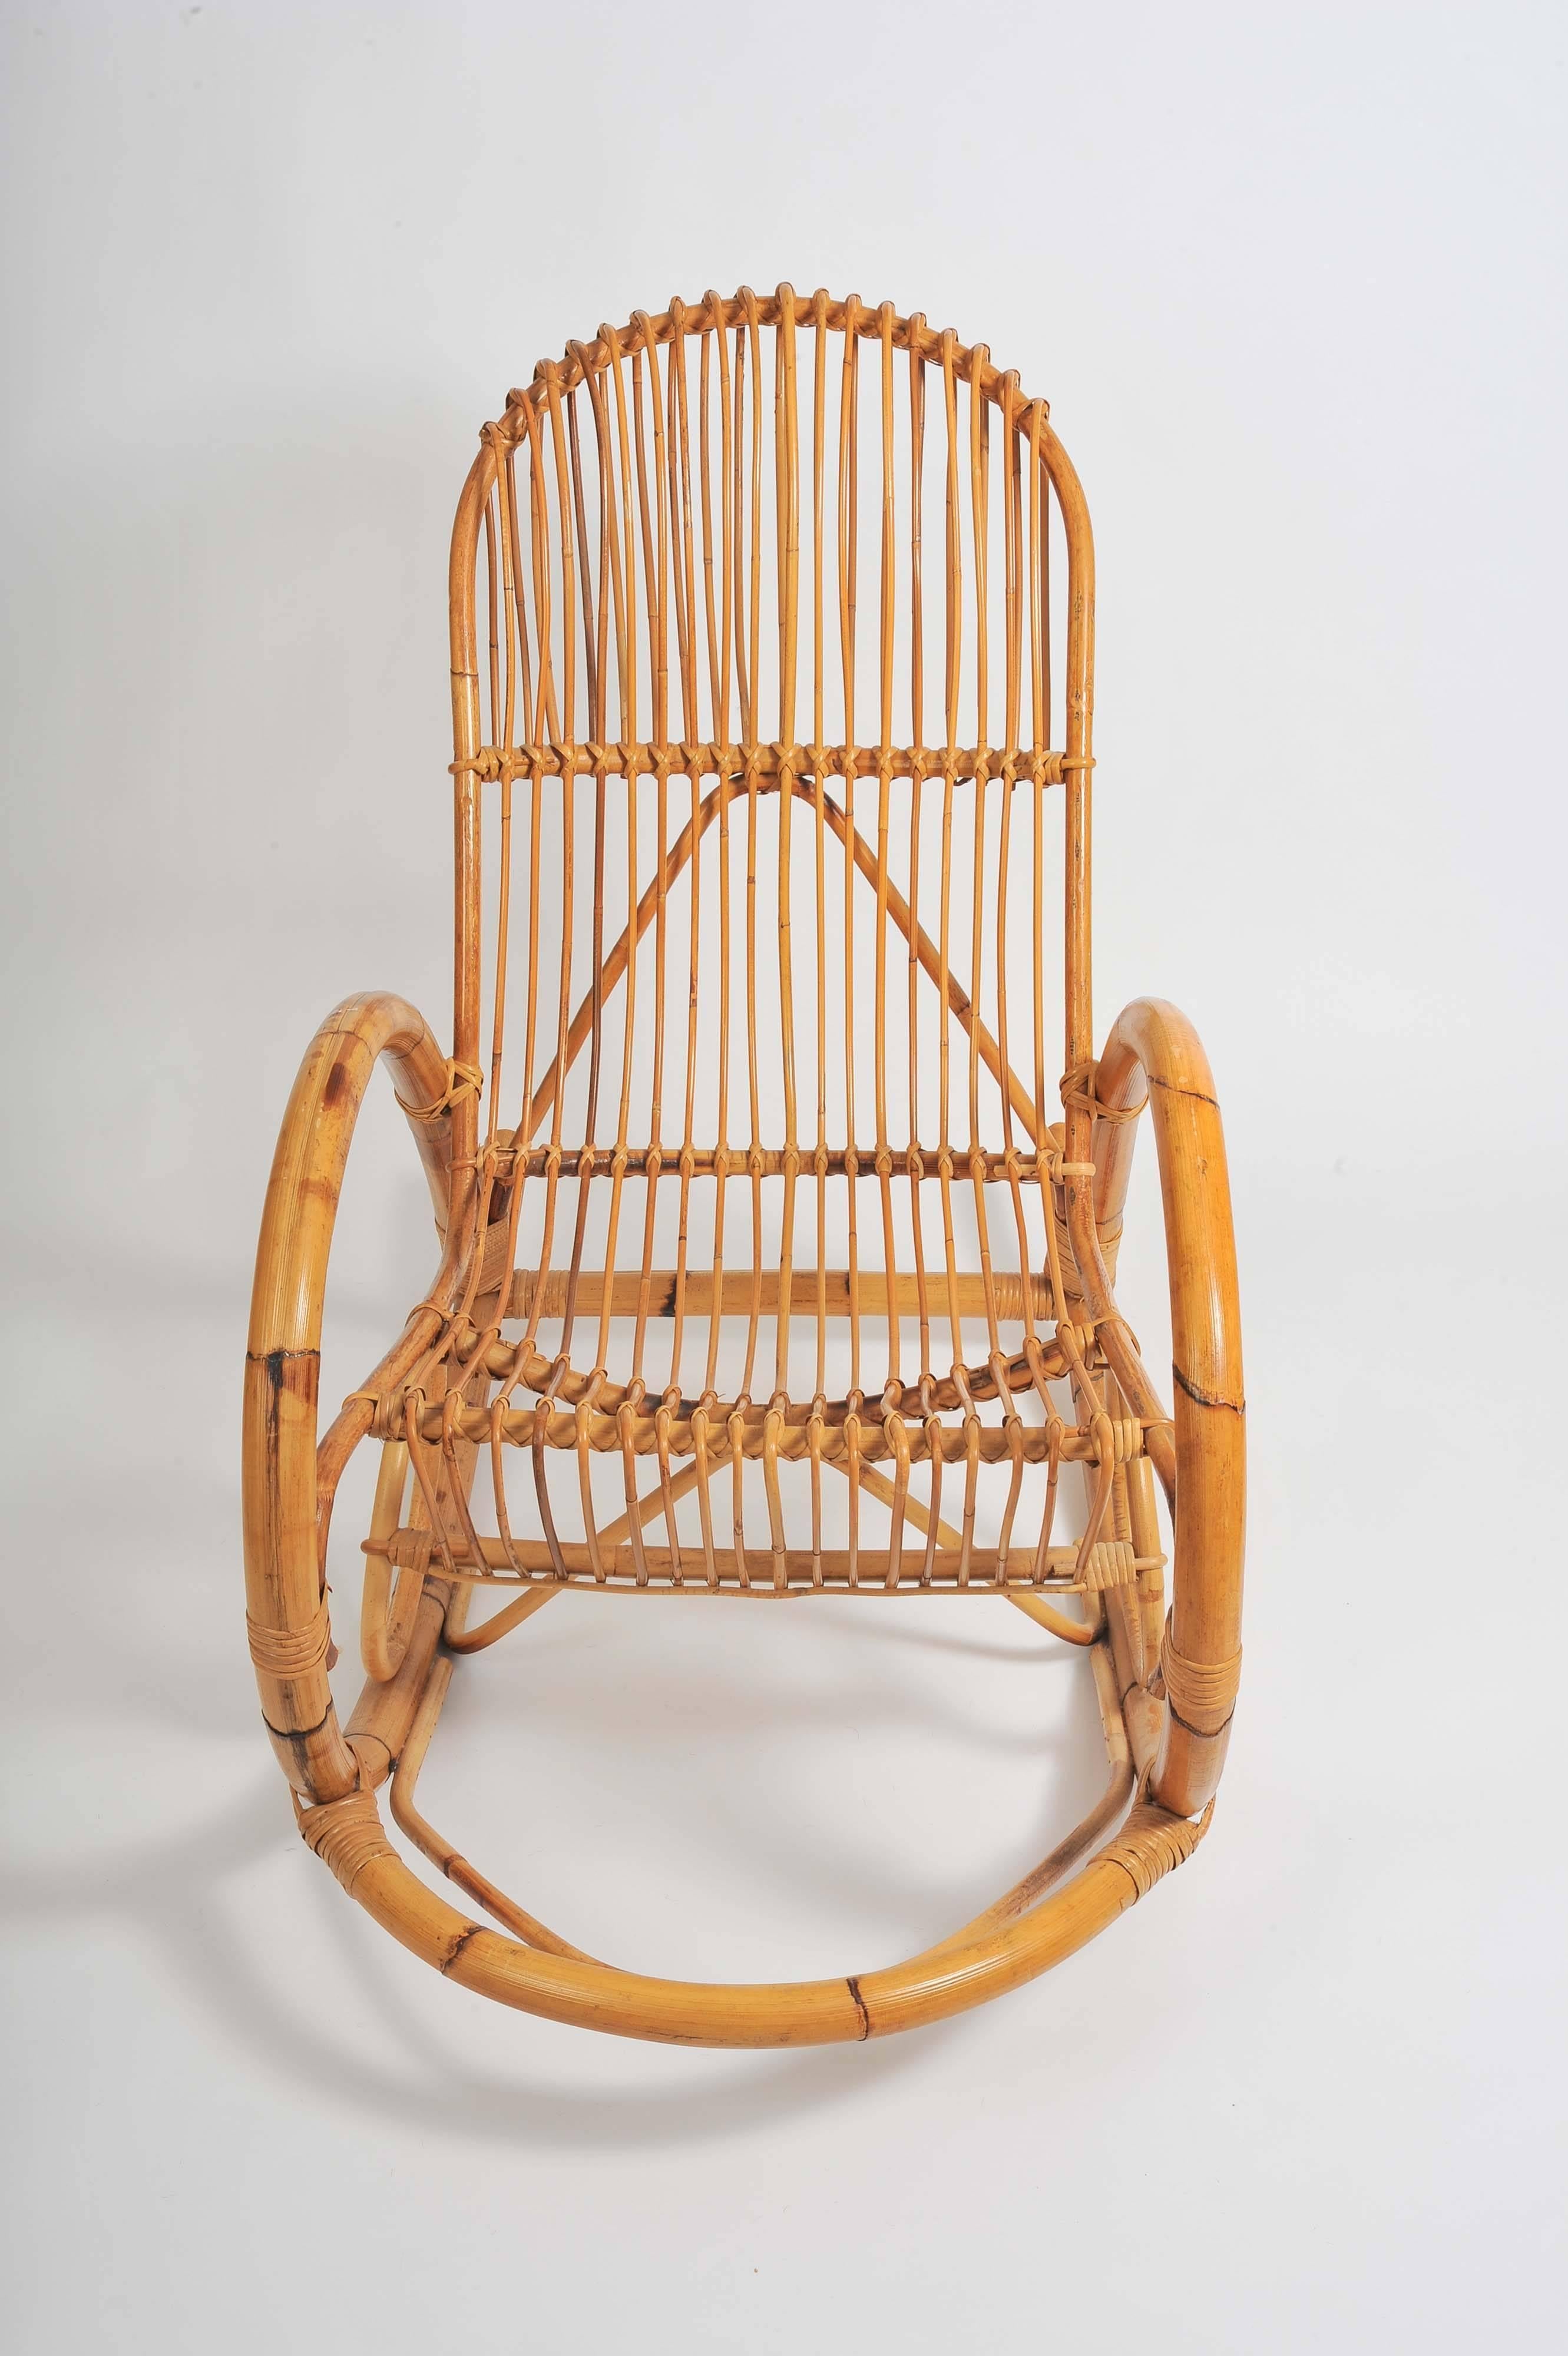 A fine example of a 1950s bamboo rocking chair attributed to Italian designer Franco Albini,
circa 1950s.
Designed with comfort in mind, this rocking chair would be beautiful in any patio, nursery or conservatory.
The Franco Albini chair has got